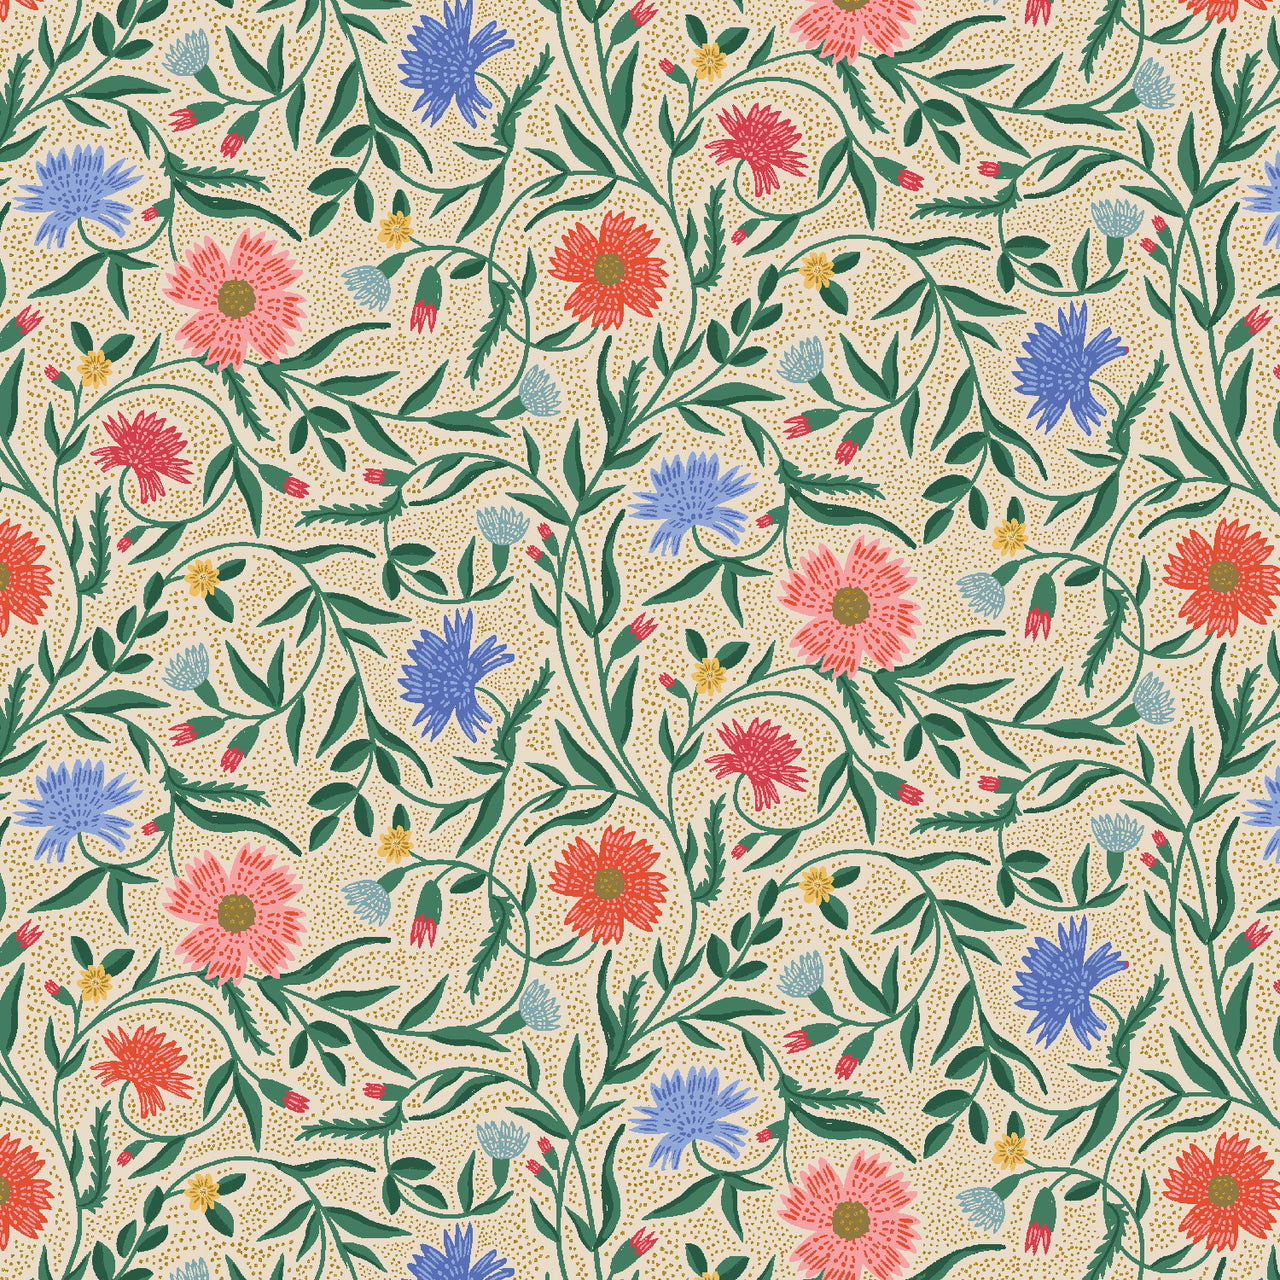 Vintage Garden by Rifle Paper Co : Aster in Cream Metallic : Cotton and Steel